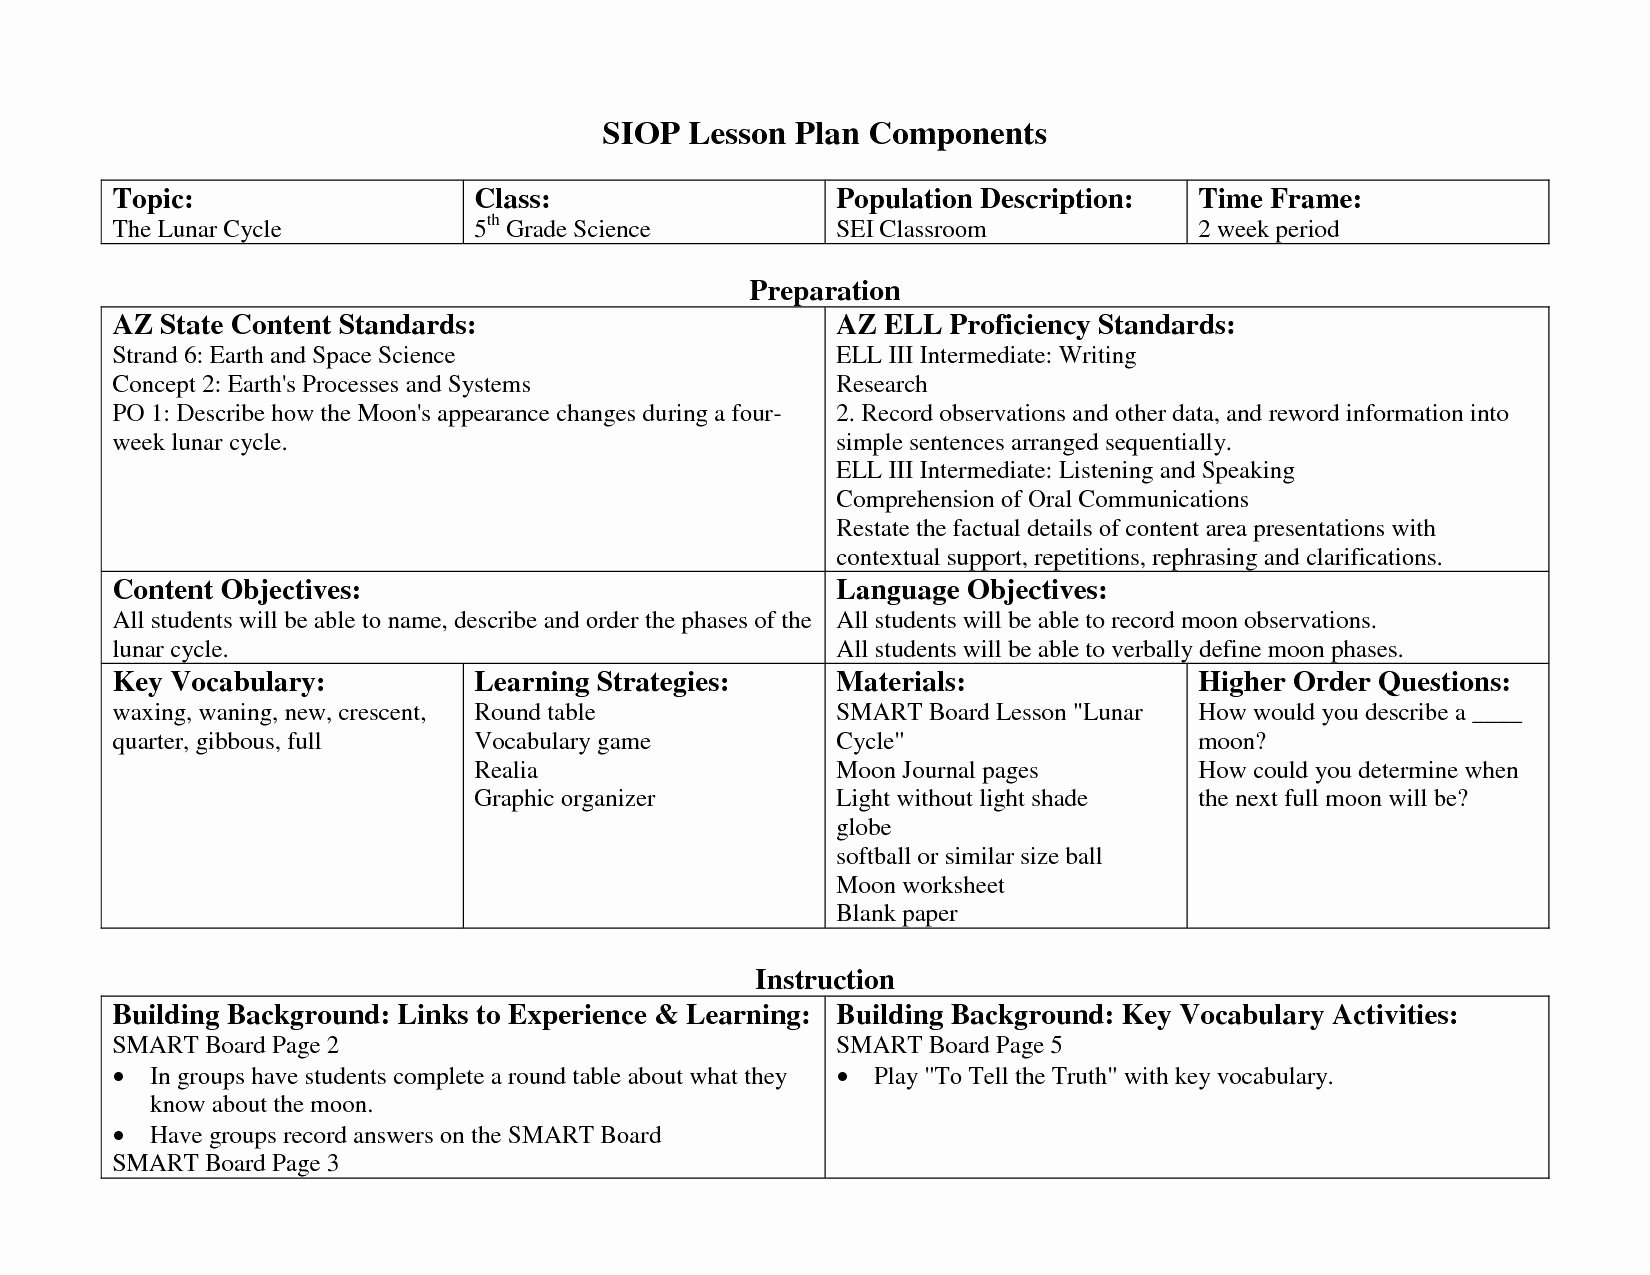 96 Siop Model Lesson Plan Examples Unusual the Siop